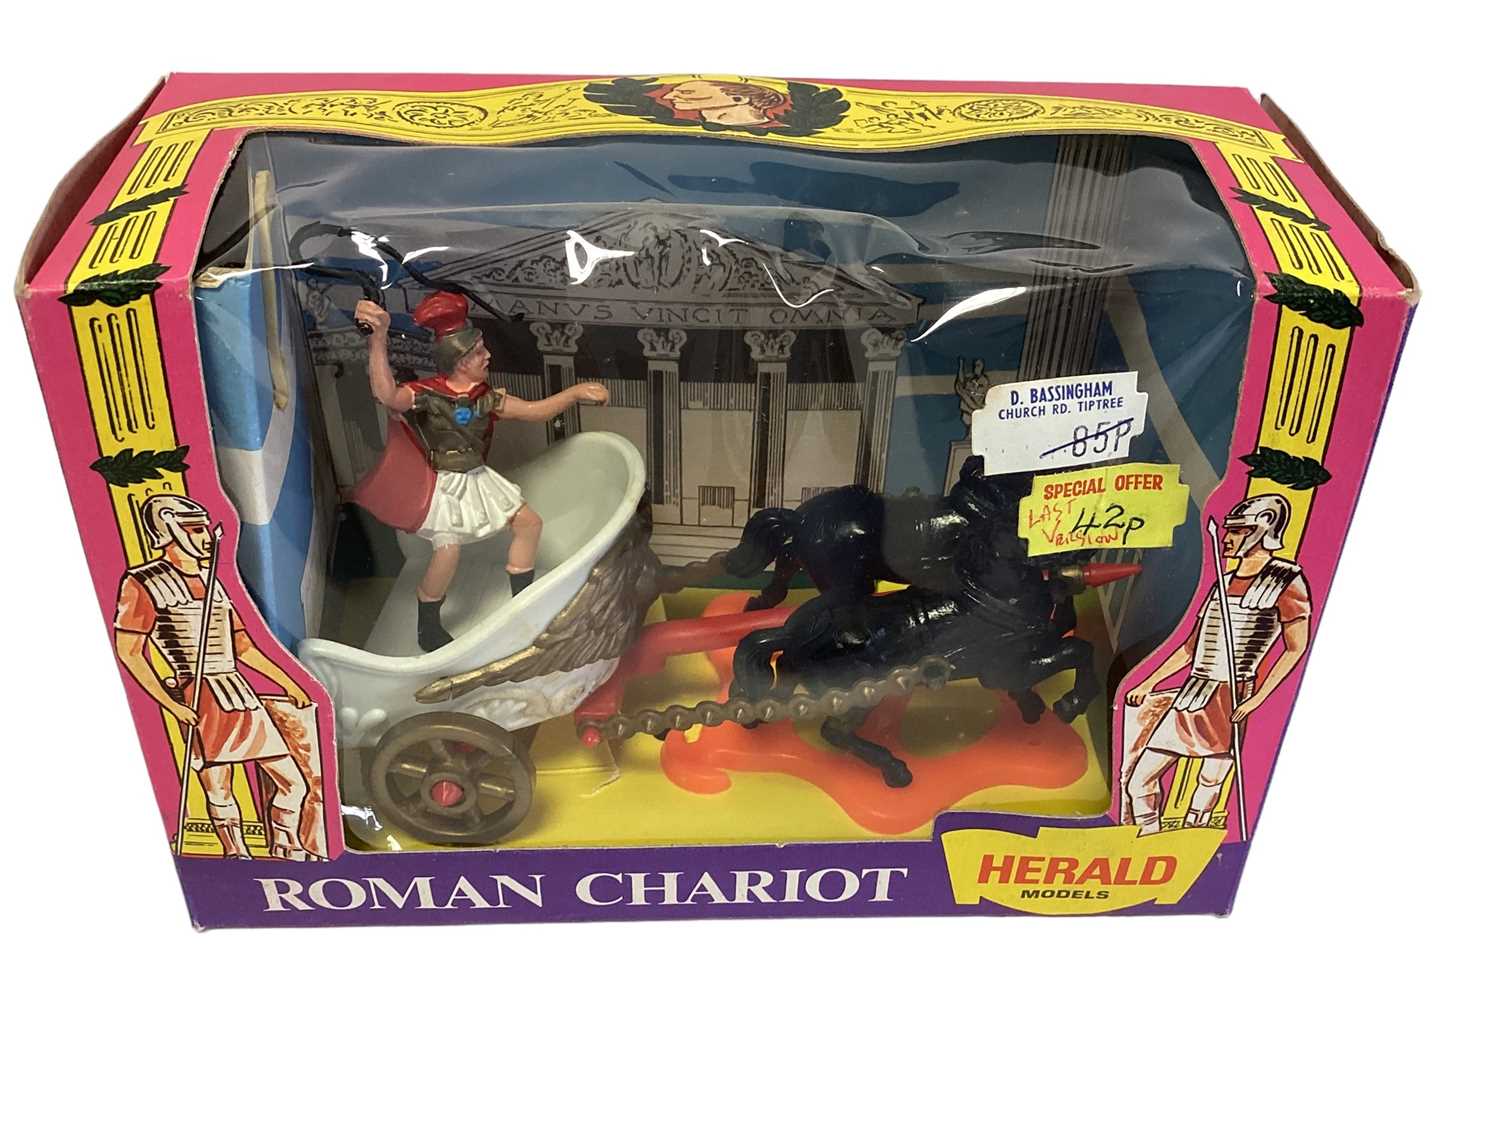 Herald Series of unbreakable Model Soldiers Cowboys & Indians and Roman Chariot No.4590, both boxed - Image 3 of 4